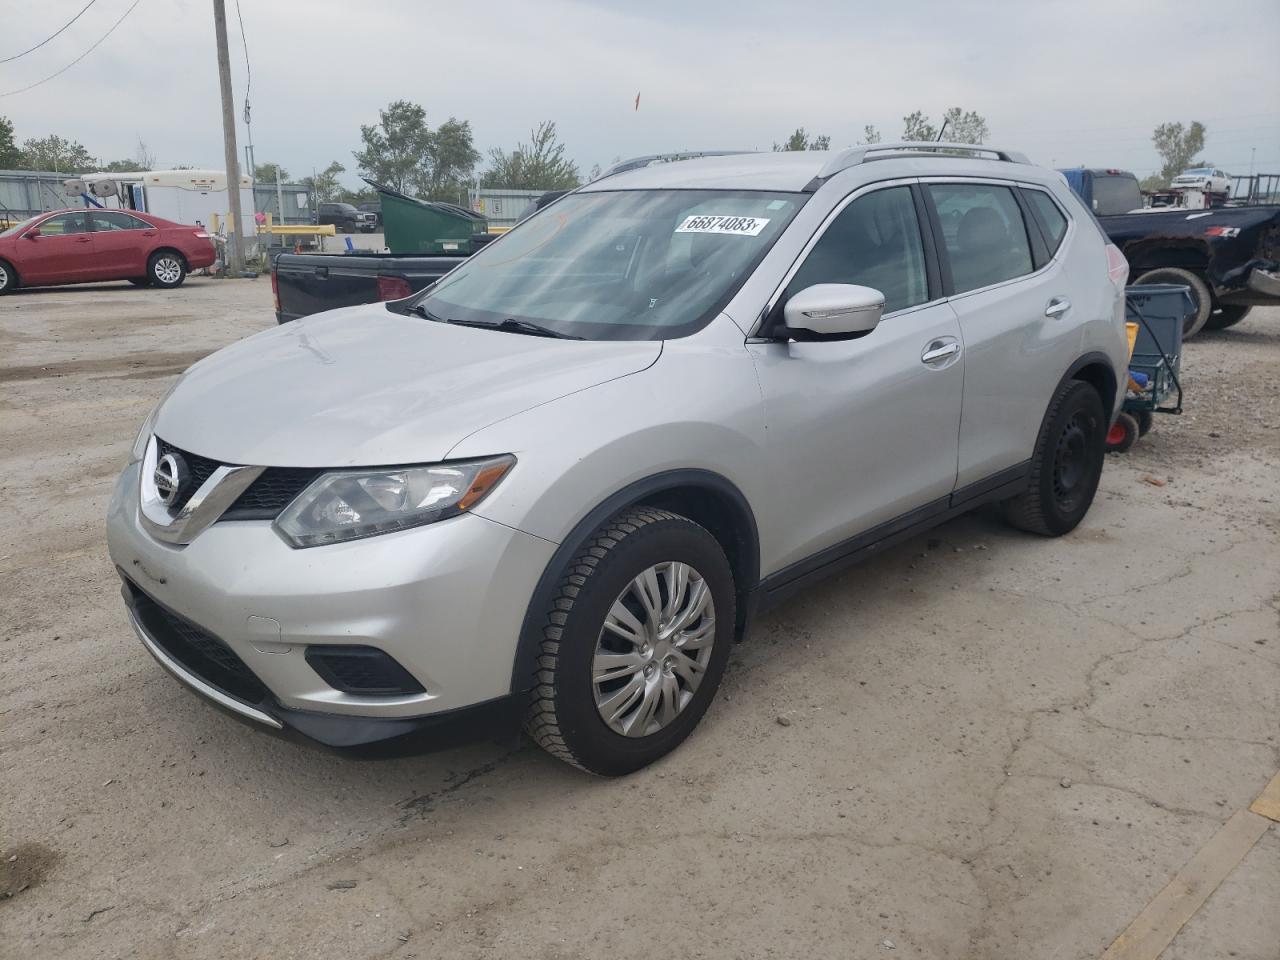 5N1AT2MT8EC****** Salvage and Wrecked 2014 Nissan Rogue in IN - Dyer